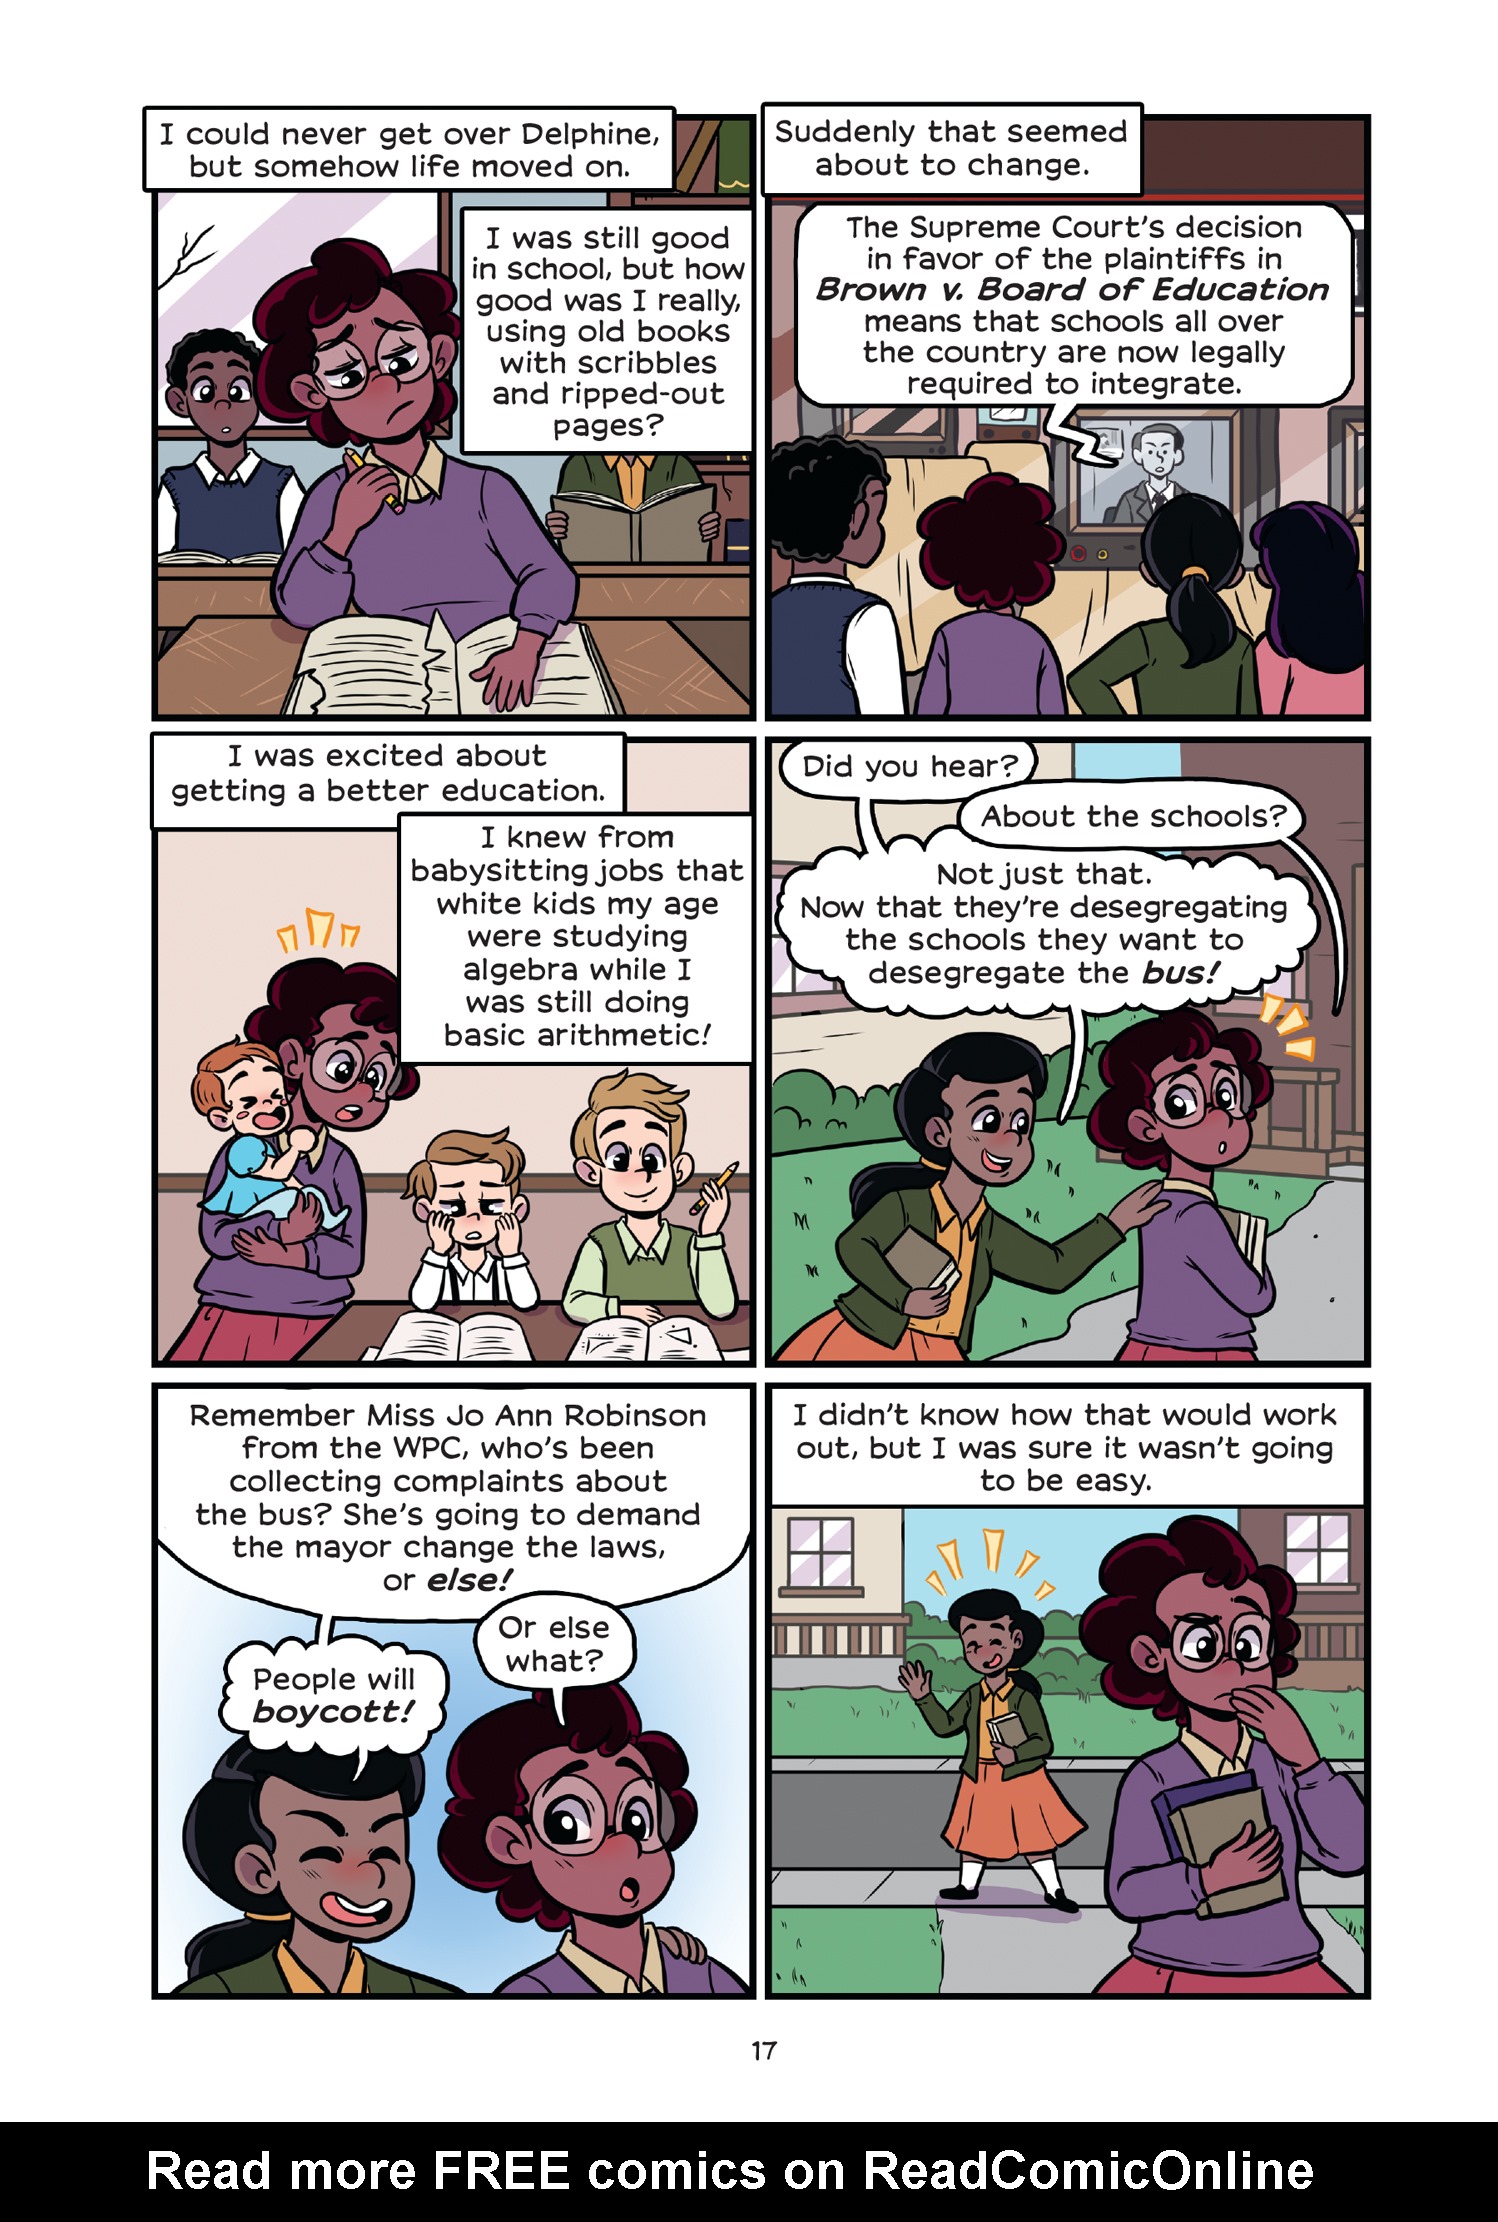 Read online History Comics comic -  Issue # Rosa Parks & Claudette Colvin - Civil Rights Heroes - 23